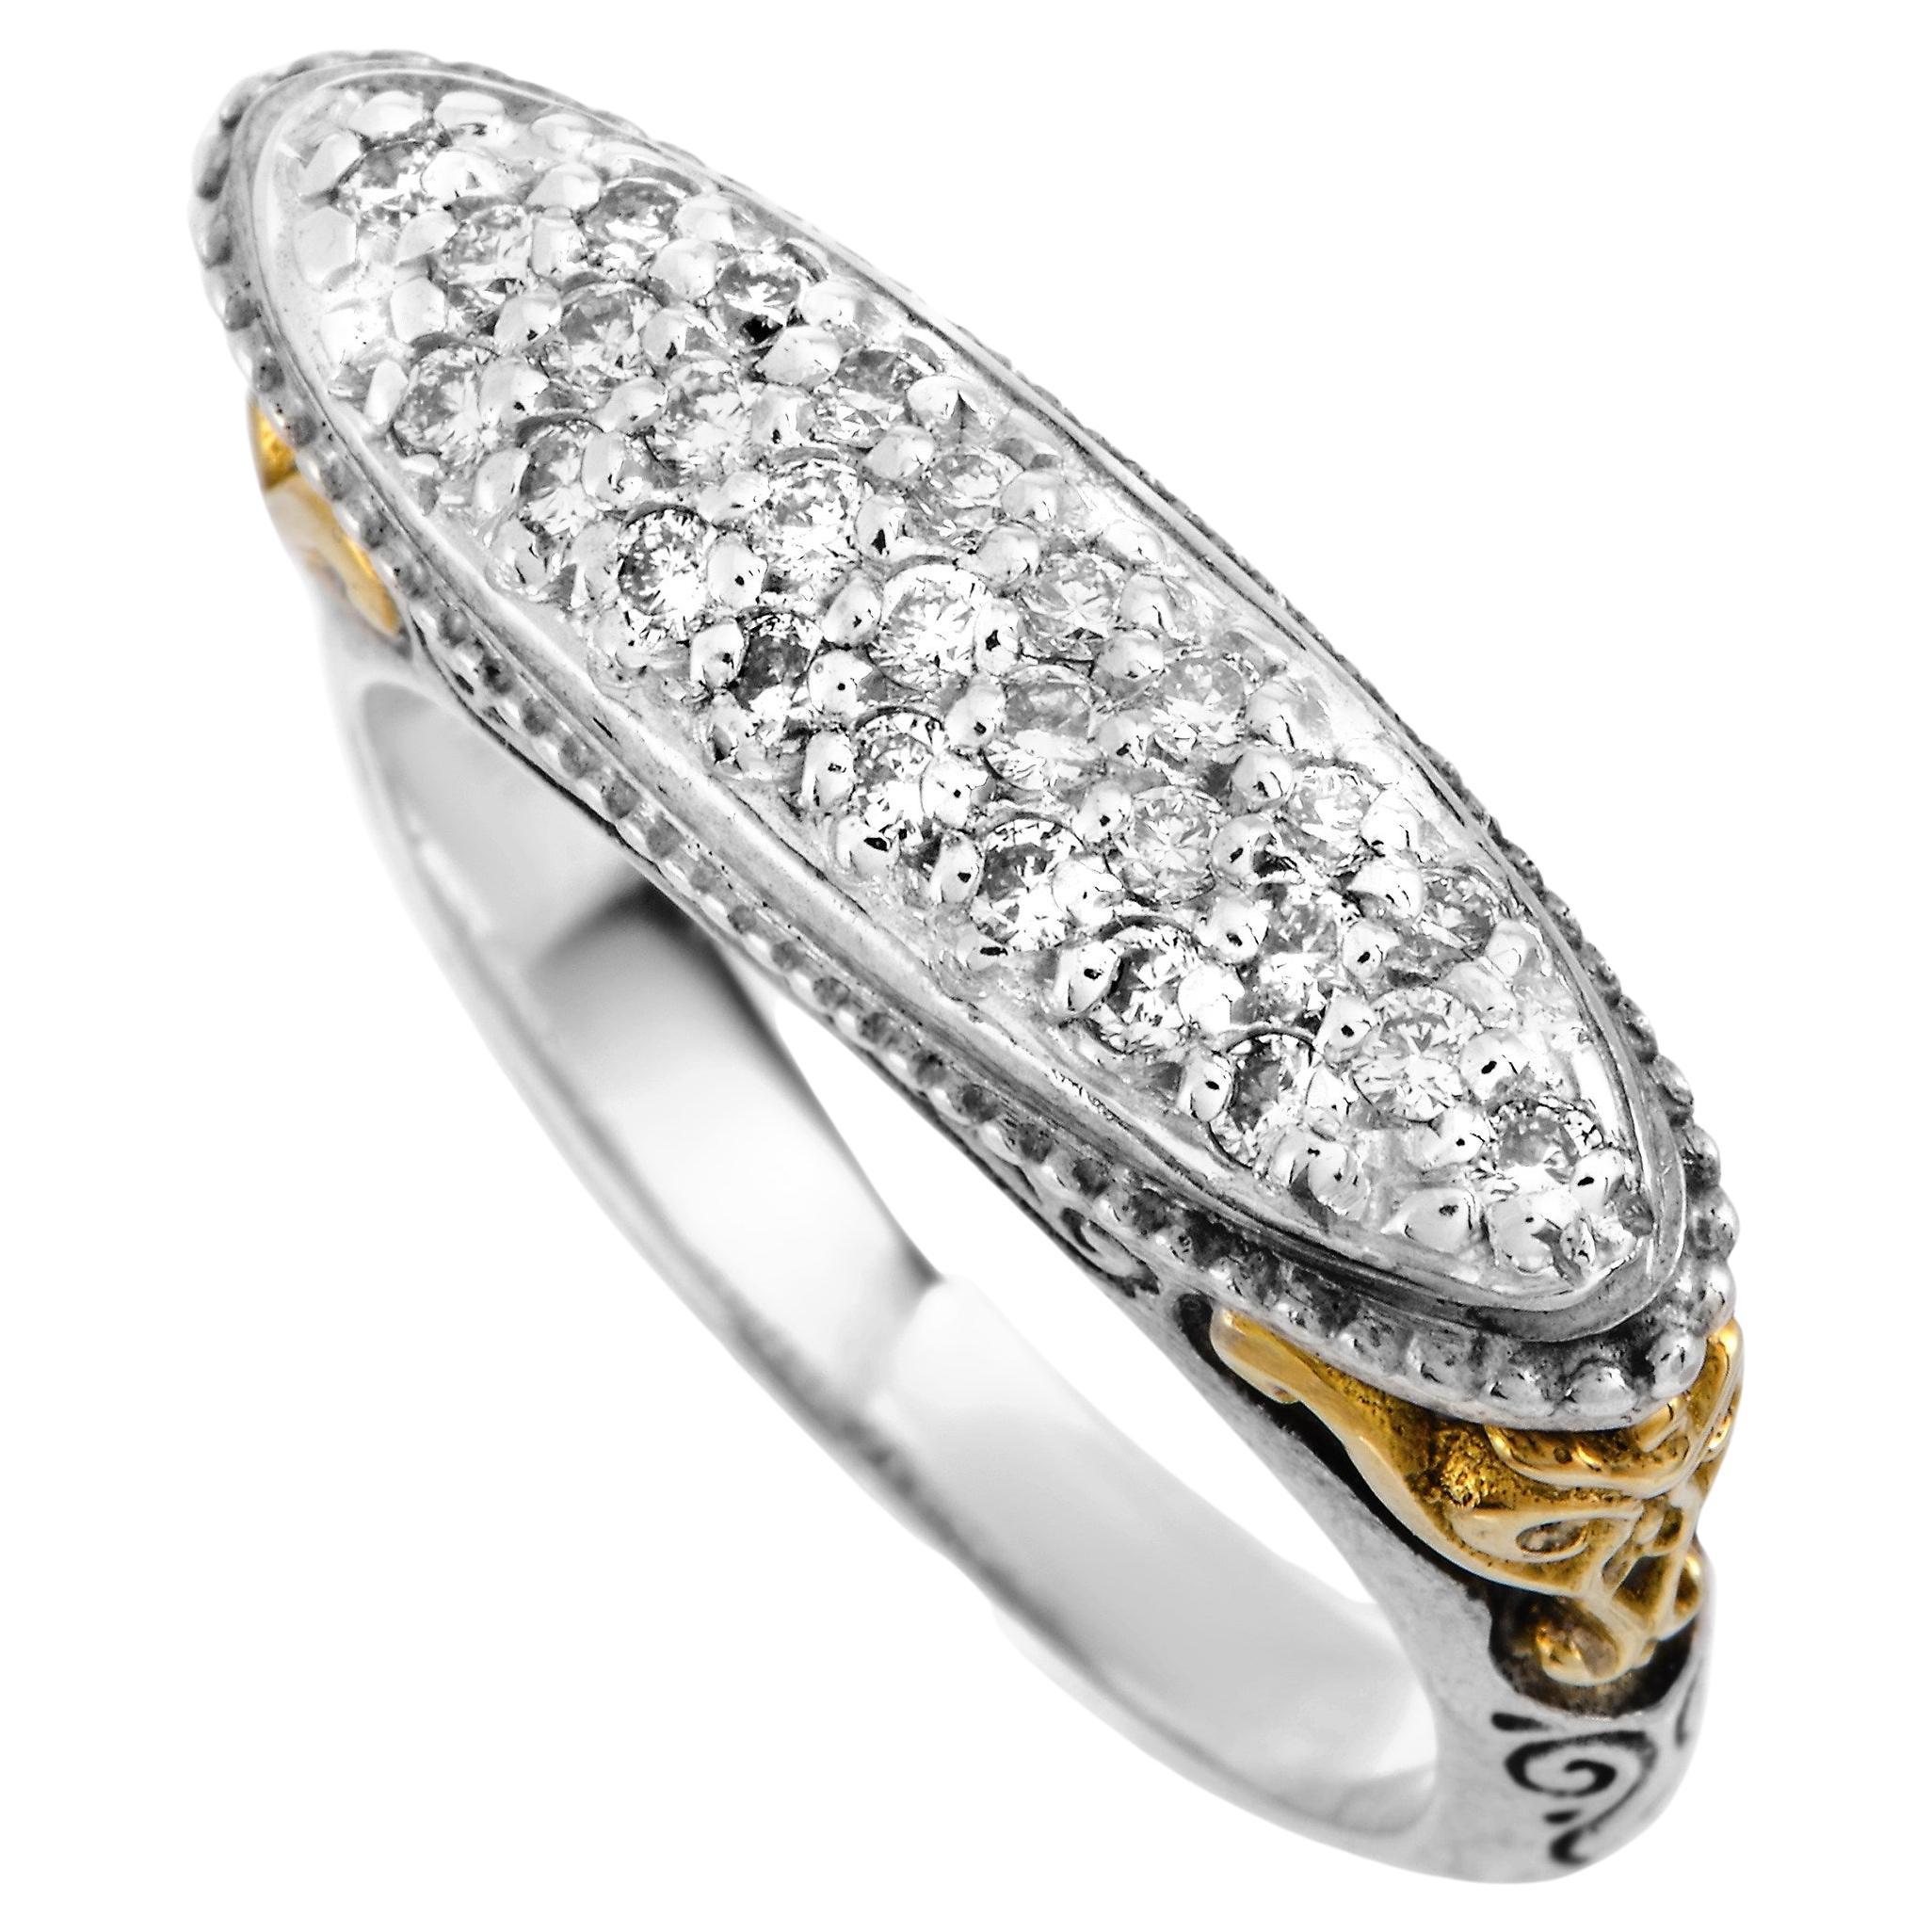 Konstantino 18K Yellow Gold and Sterling Silver Diamond Ring